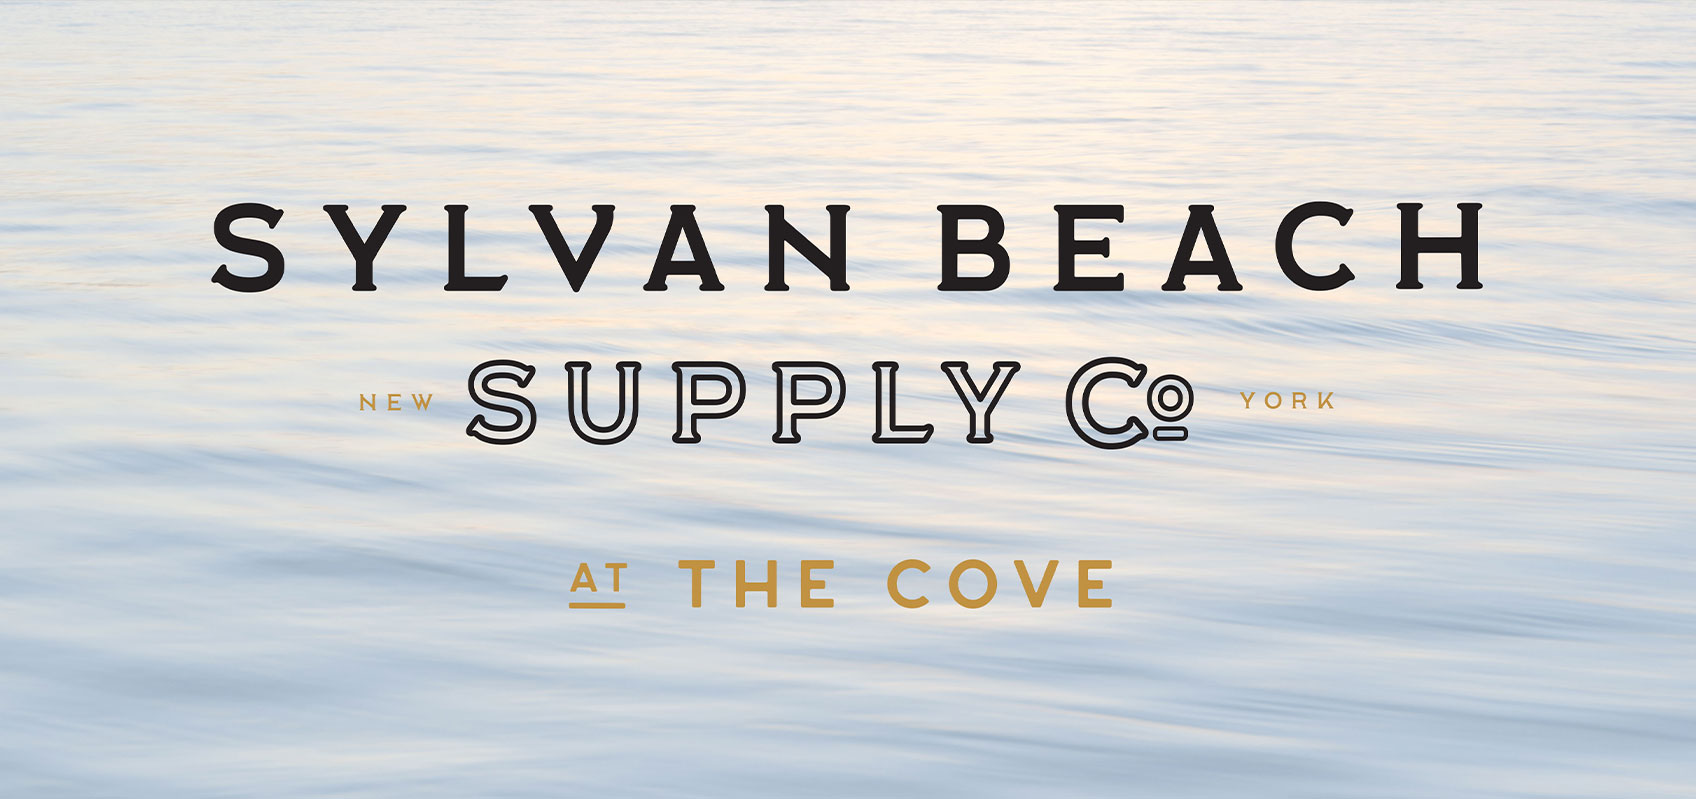 Sylvan Beach Supply Co Logo over water with ripples